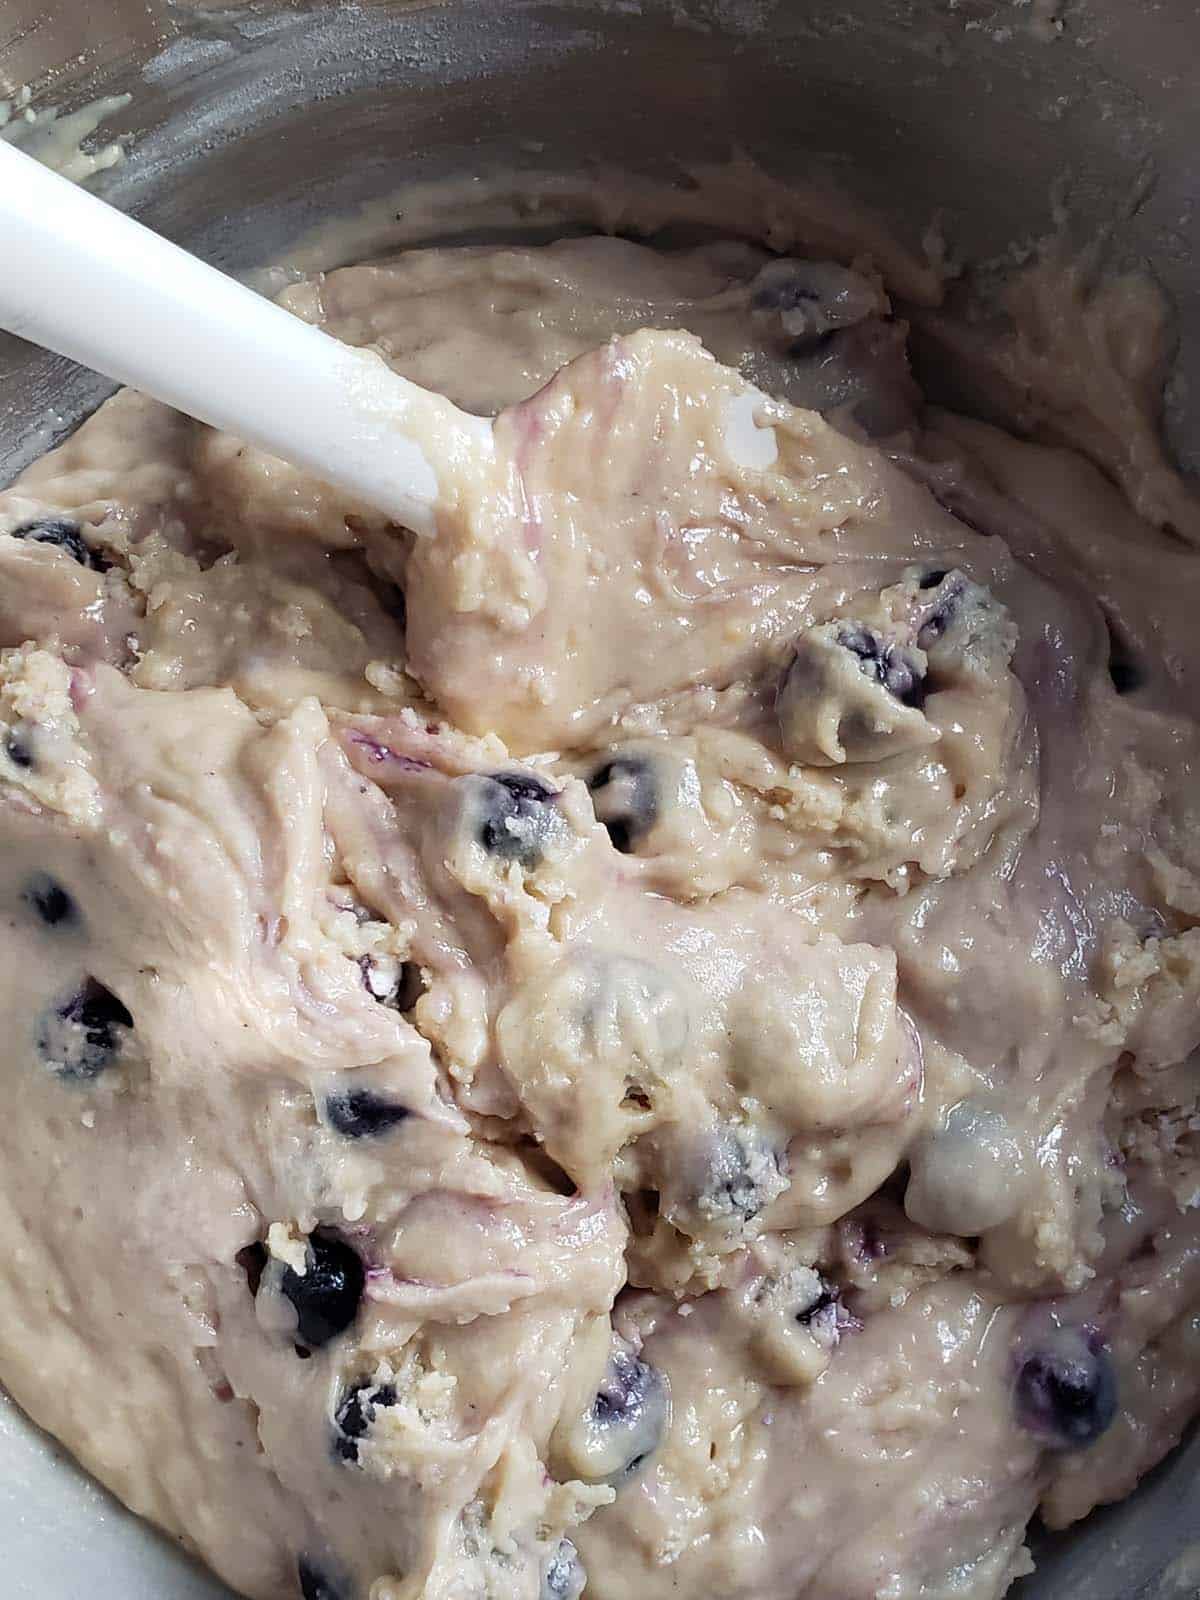 Blueberry muffin batter in a metal bowl.